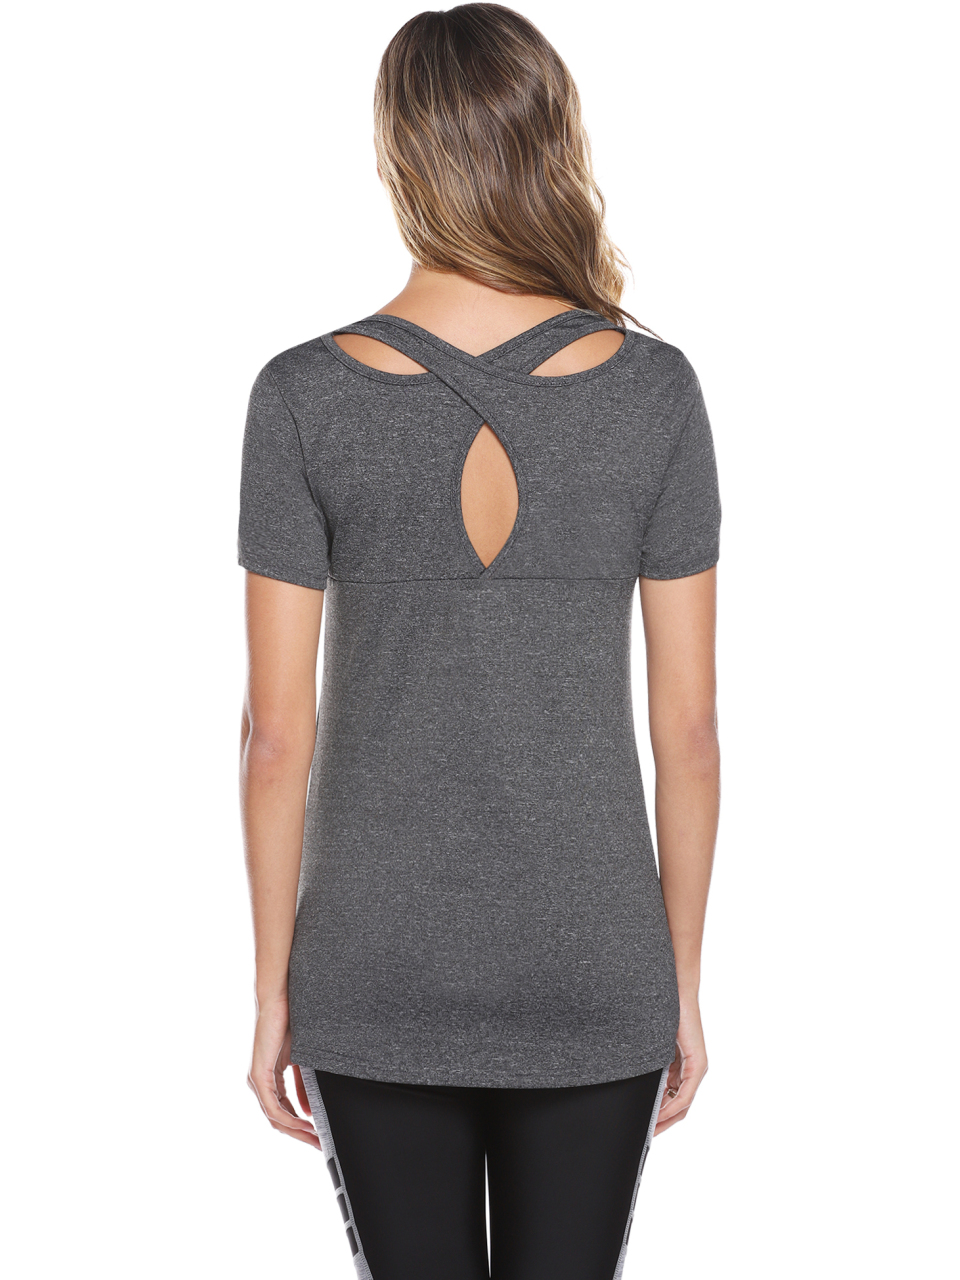 Ladies Casual Back Cross Cutout Sports Top